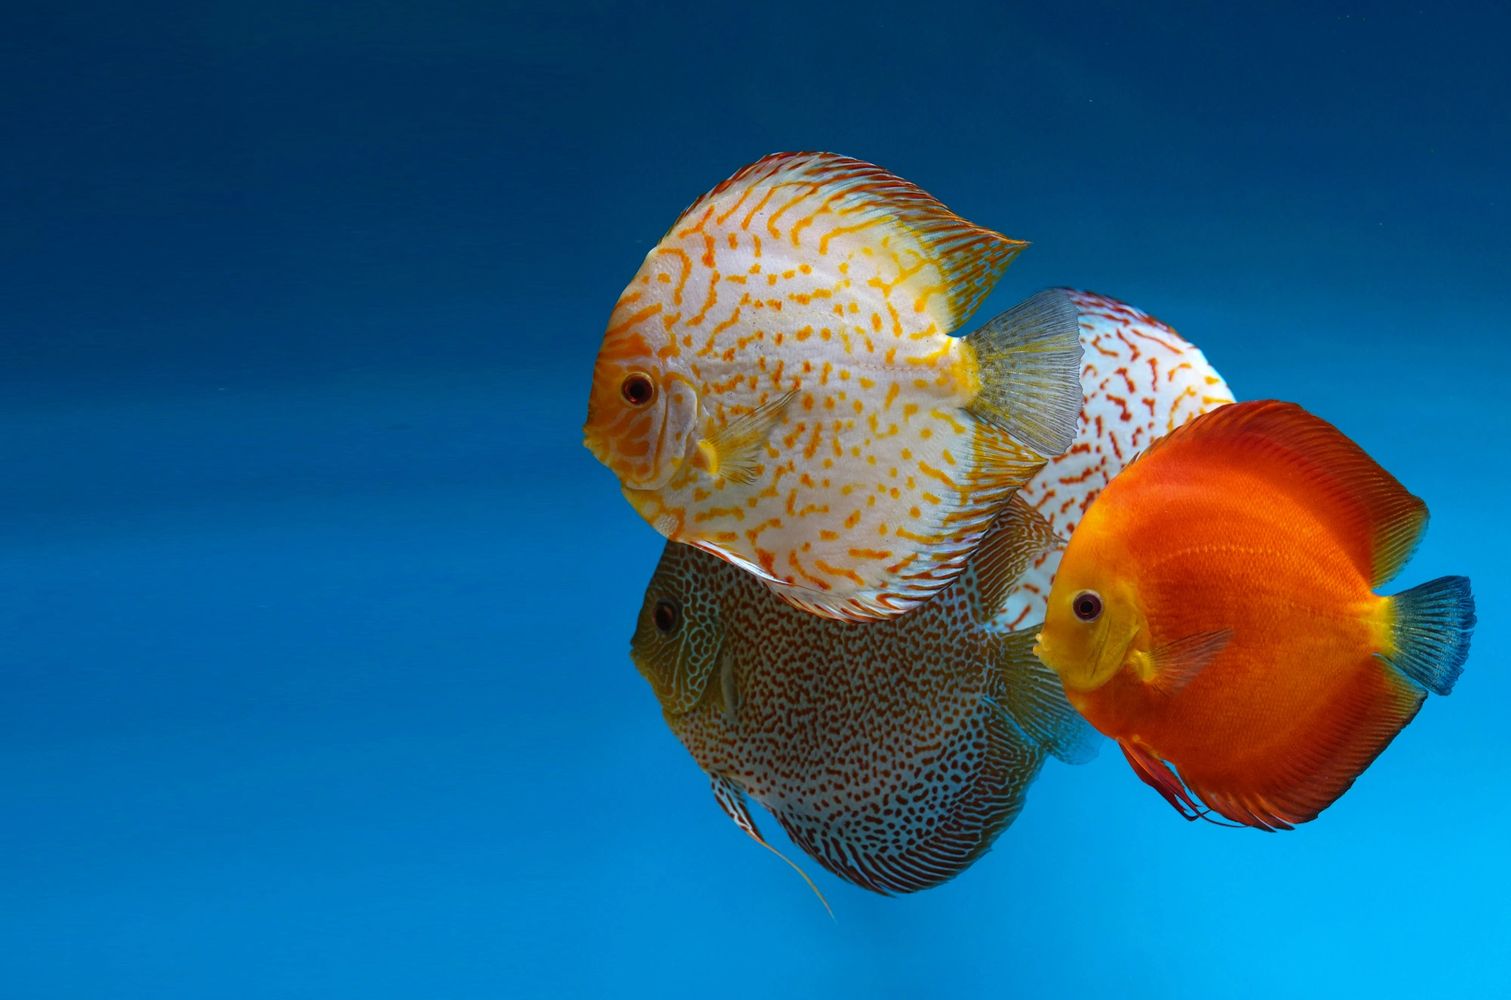 Yellow Checkerboard in a group of Discus fish